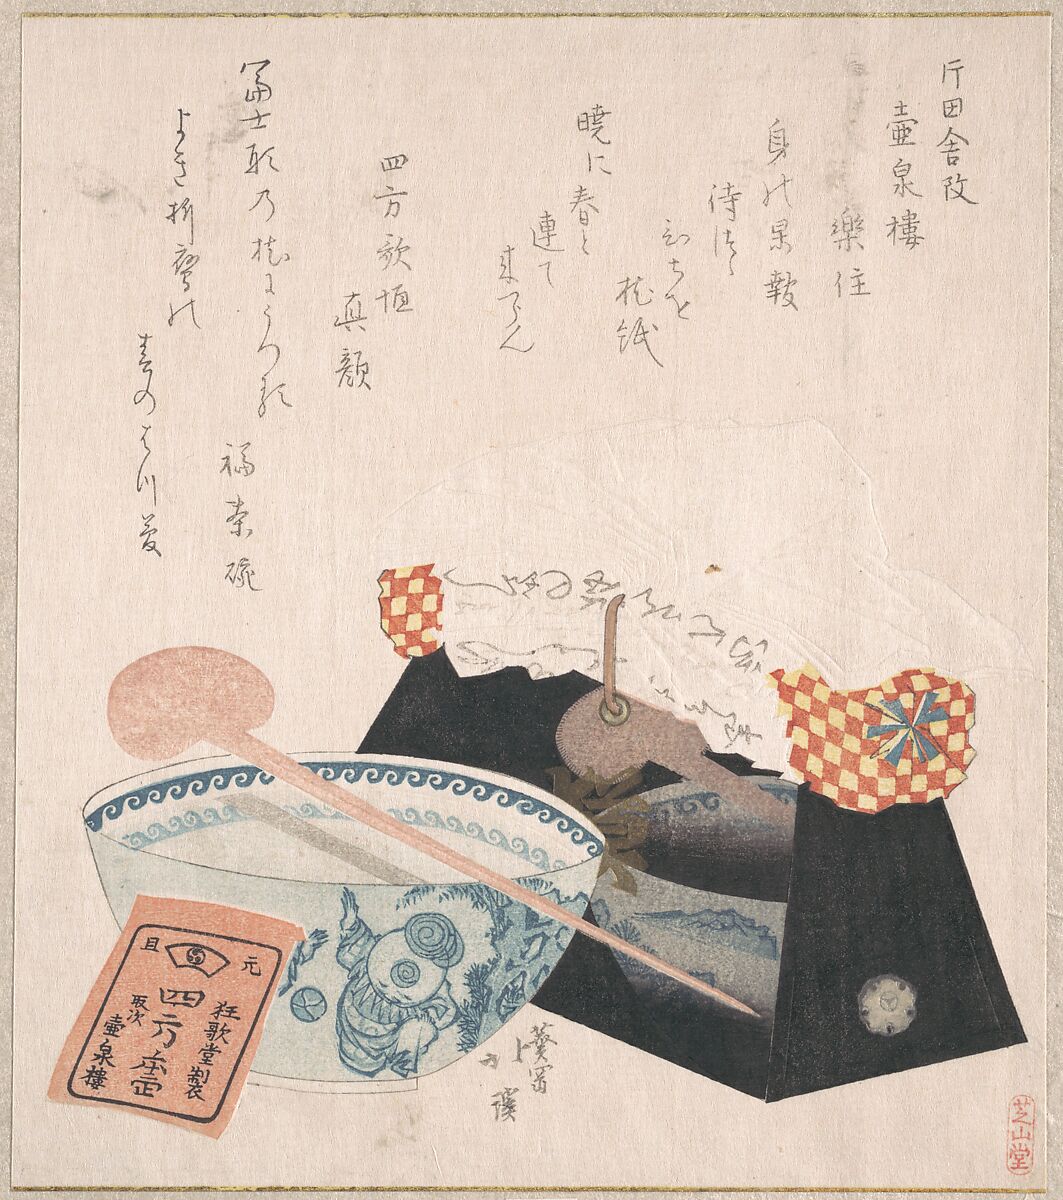 Pillow for Women and a Bowl, Totoya Hokkei (Japanese, 1780–1850), Part of an album of woodblock prints (surimono); ink and color on paper, Japan 